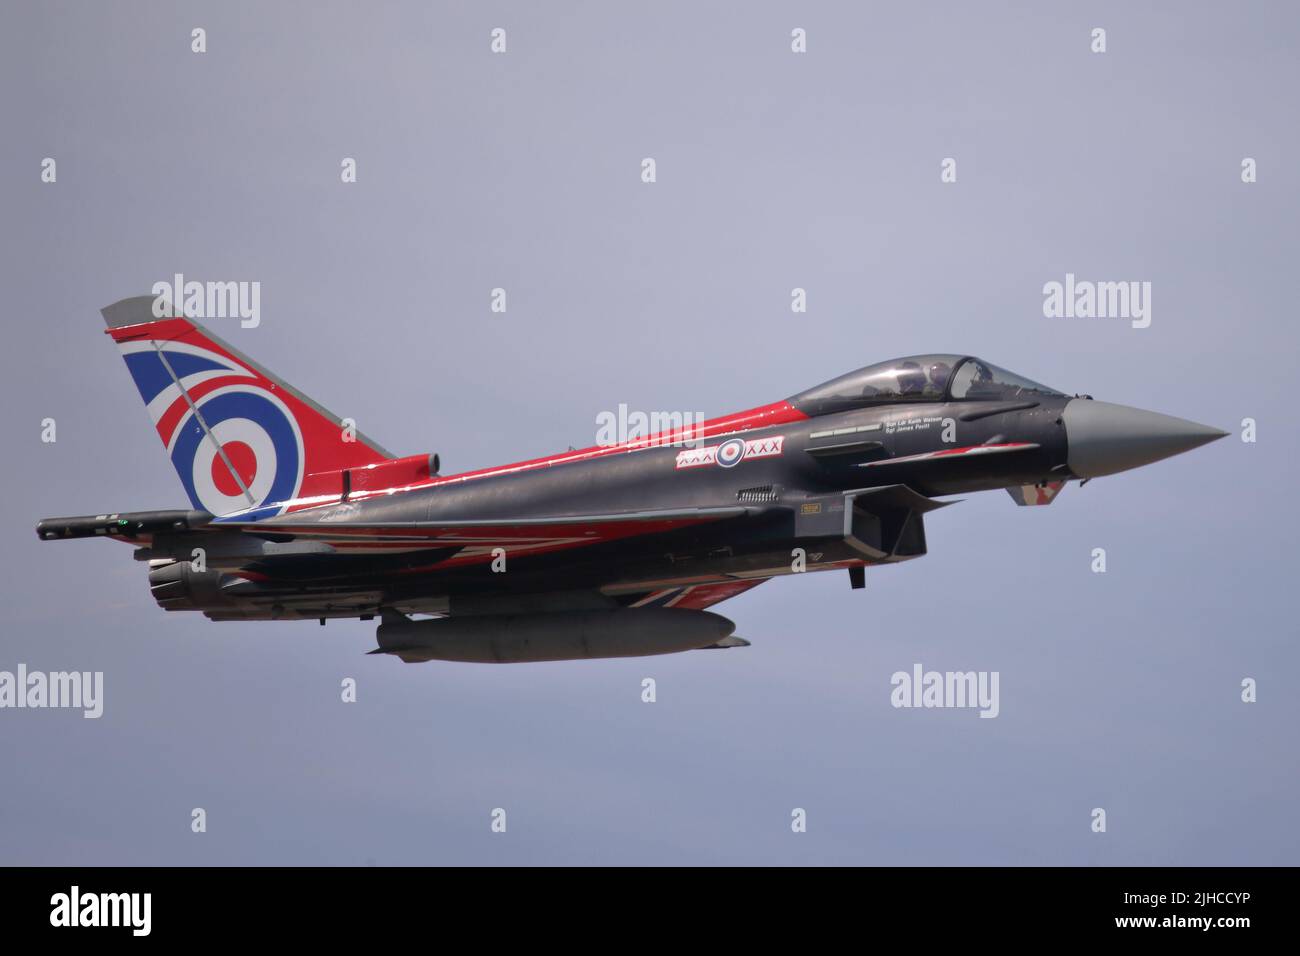 Fairford, UK. 16th July, 2022. Military aircraft from across the globe on display for the RIAT Royal International Air Tattoo. The RAF fielded a Typhoon Eurofighter with a special livery. Credit: Uwe Deffner/Alamy Live News Stock Photo